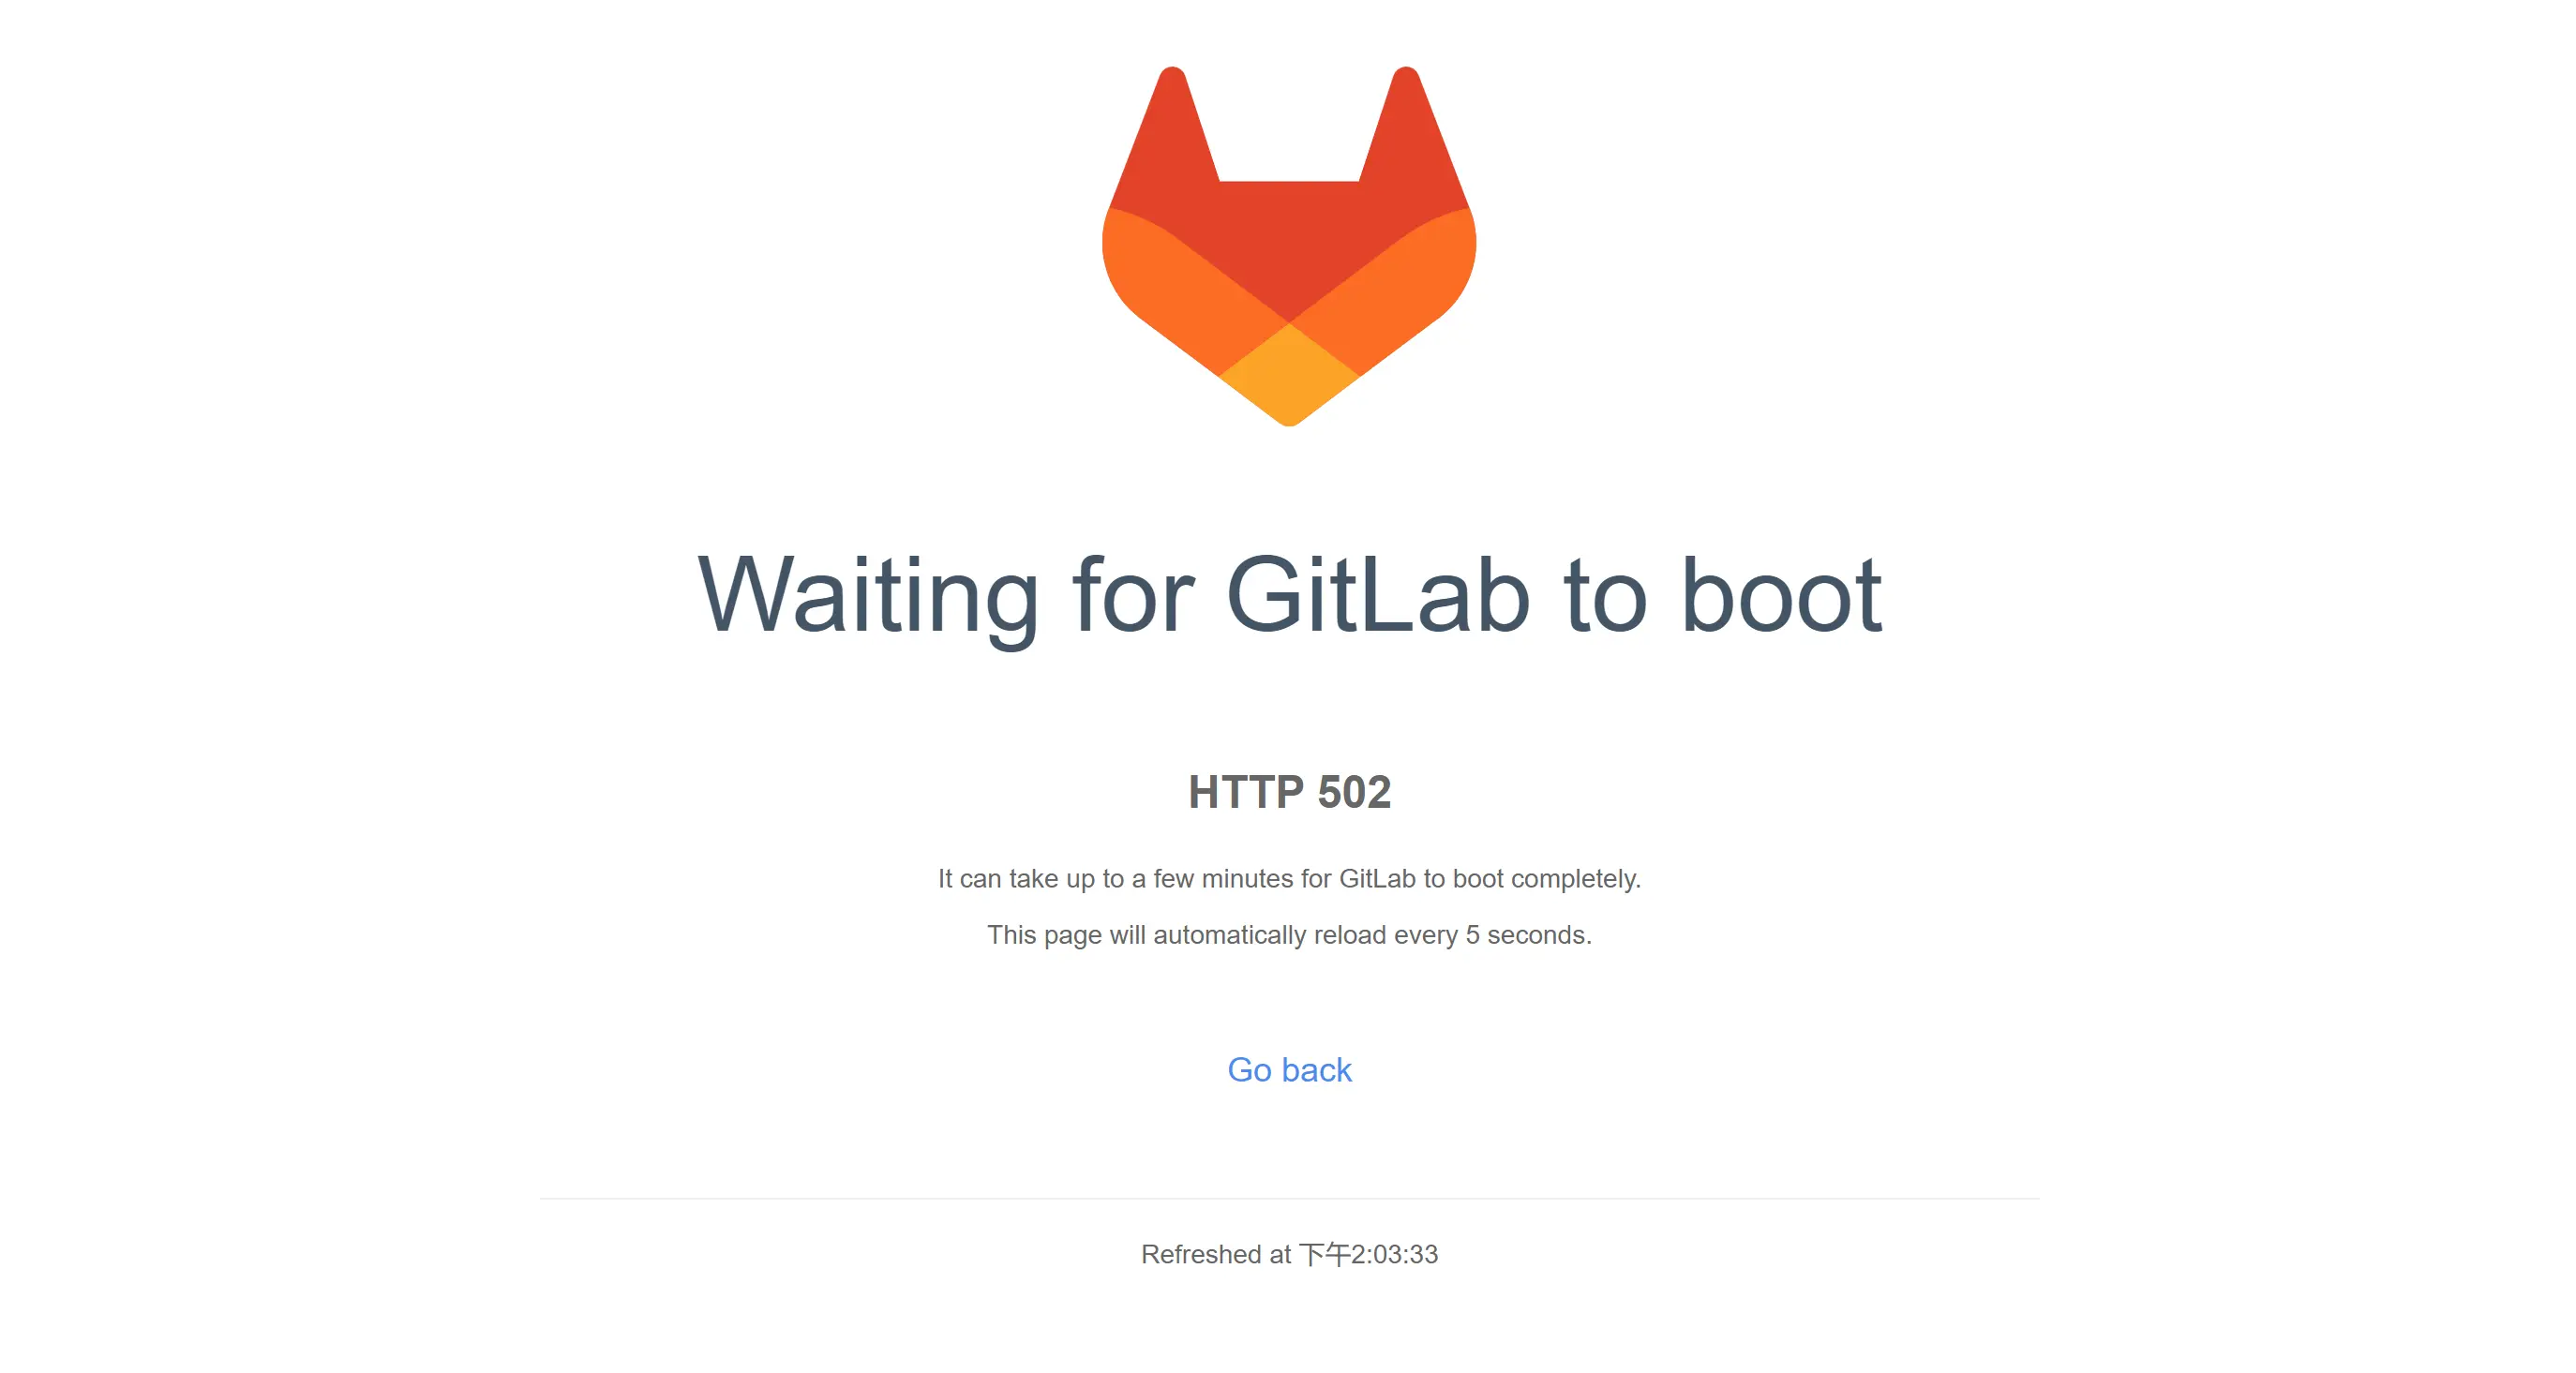 Wating for GitLab to boot - HTTP 502